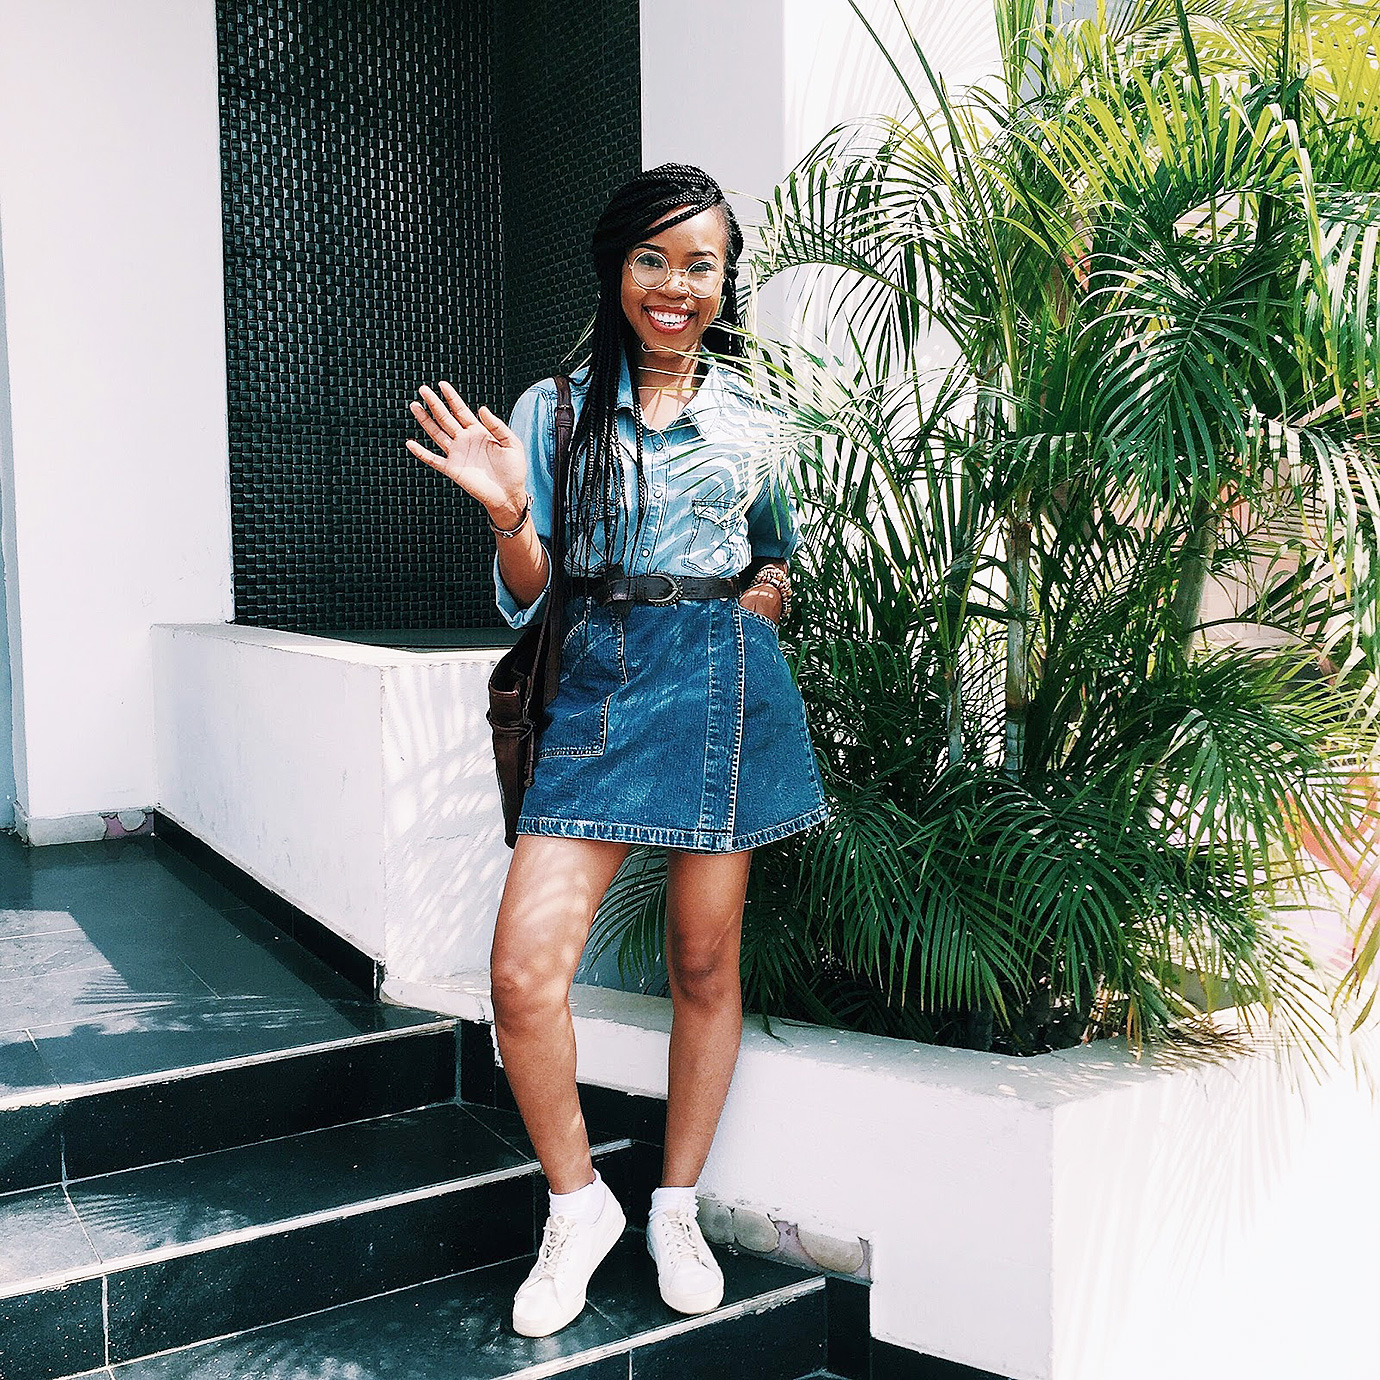 Nigerian blogger Grace of My style diary